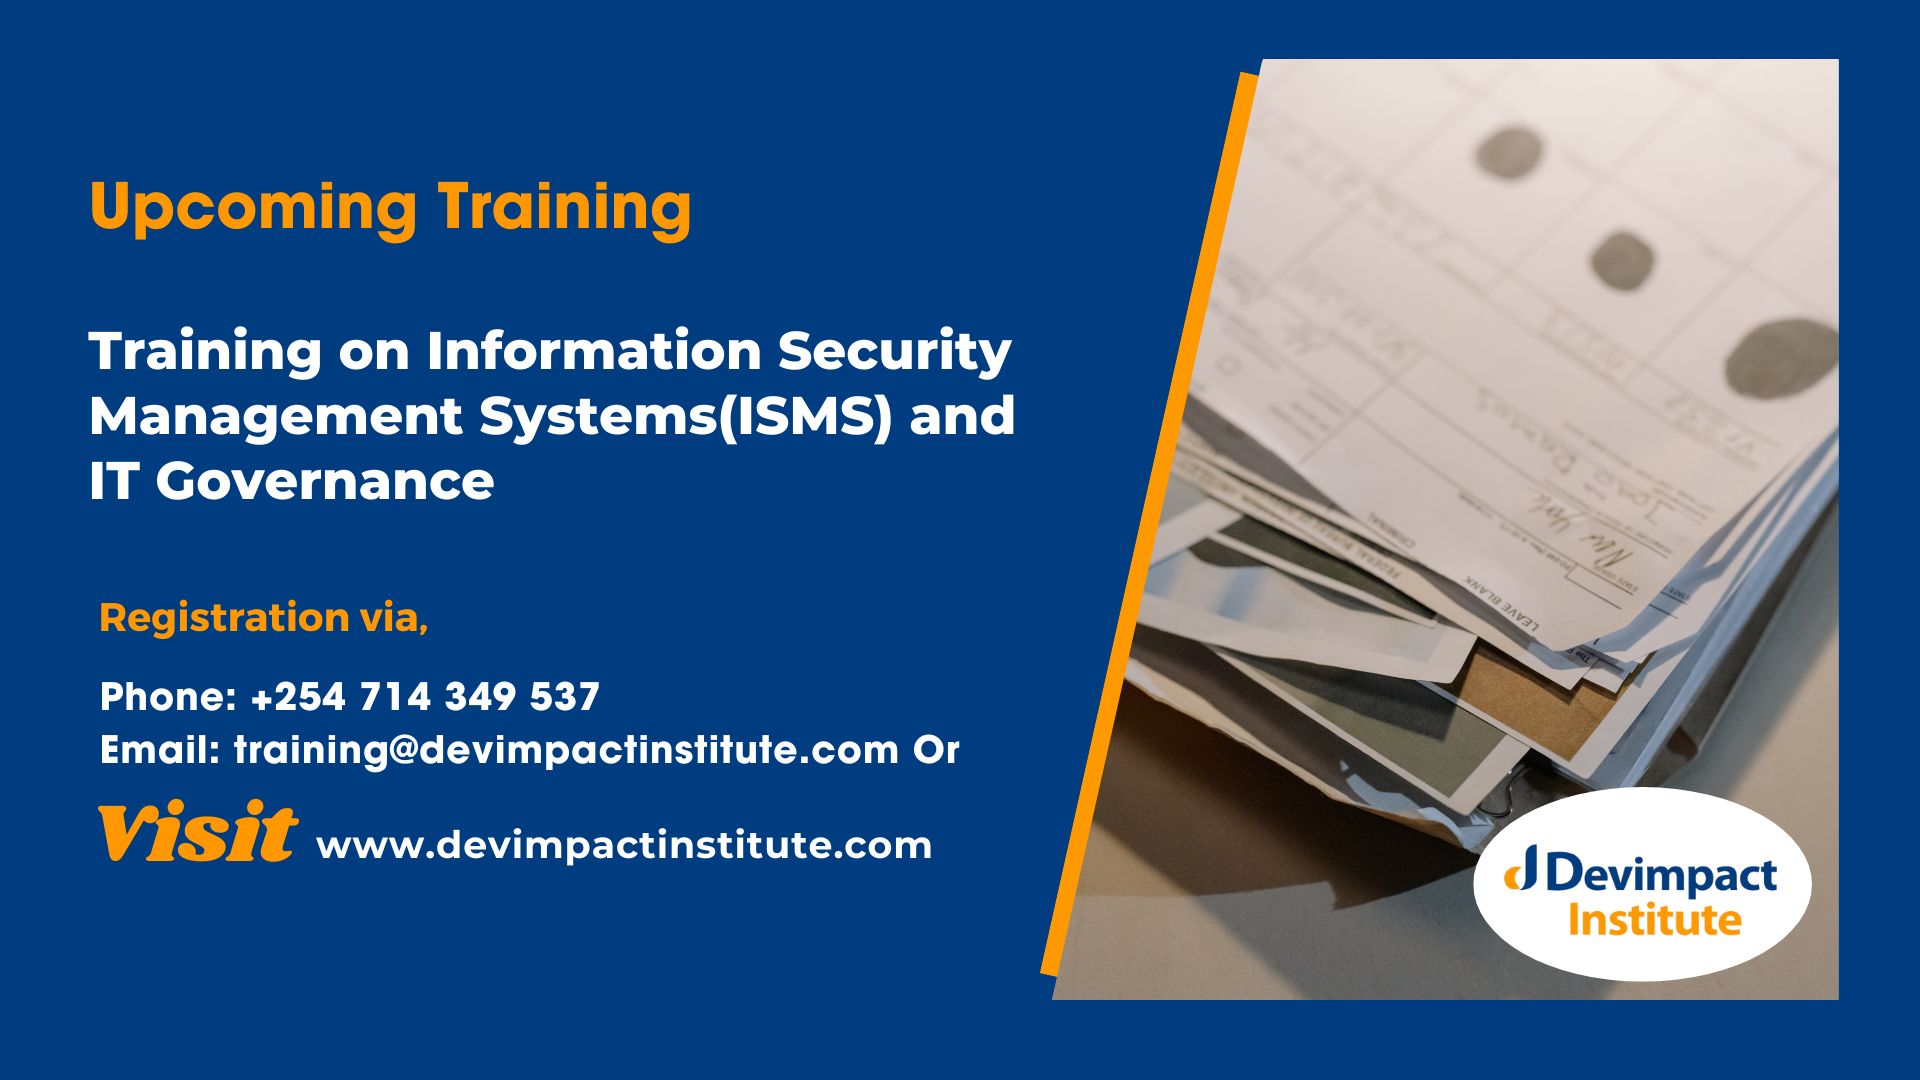 Training on Information Security Management Systems(ISMS) and IT Governance, Devimpact Institute, Nairobi, Kenya